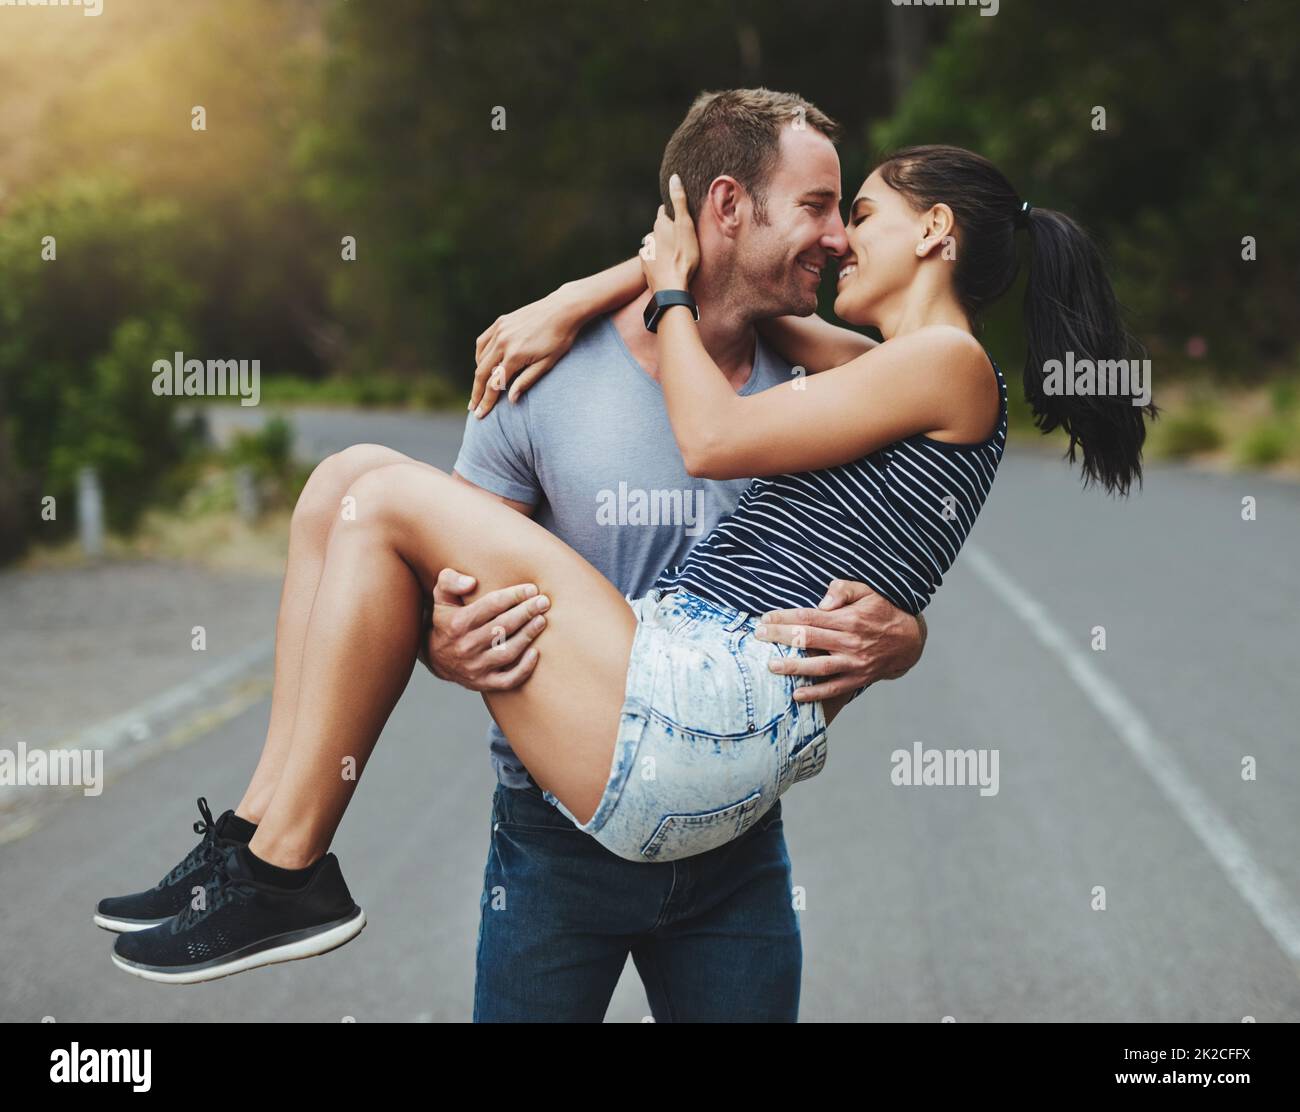 Youre my knight in shining armor. Shot of a young man romantically carrying his girlfriend down a road outdoors. Stock Photo